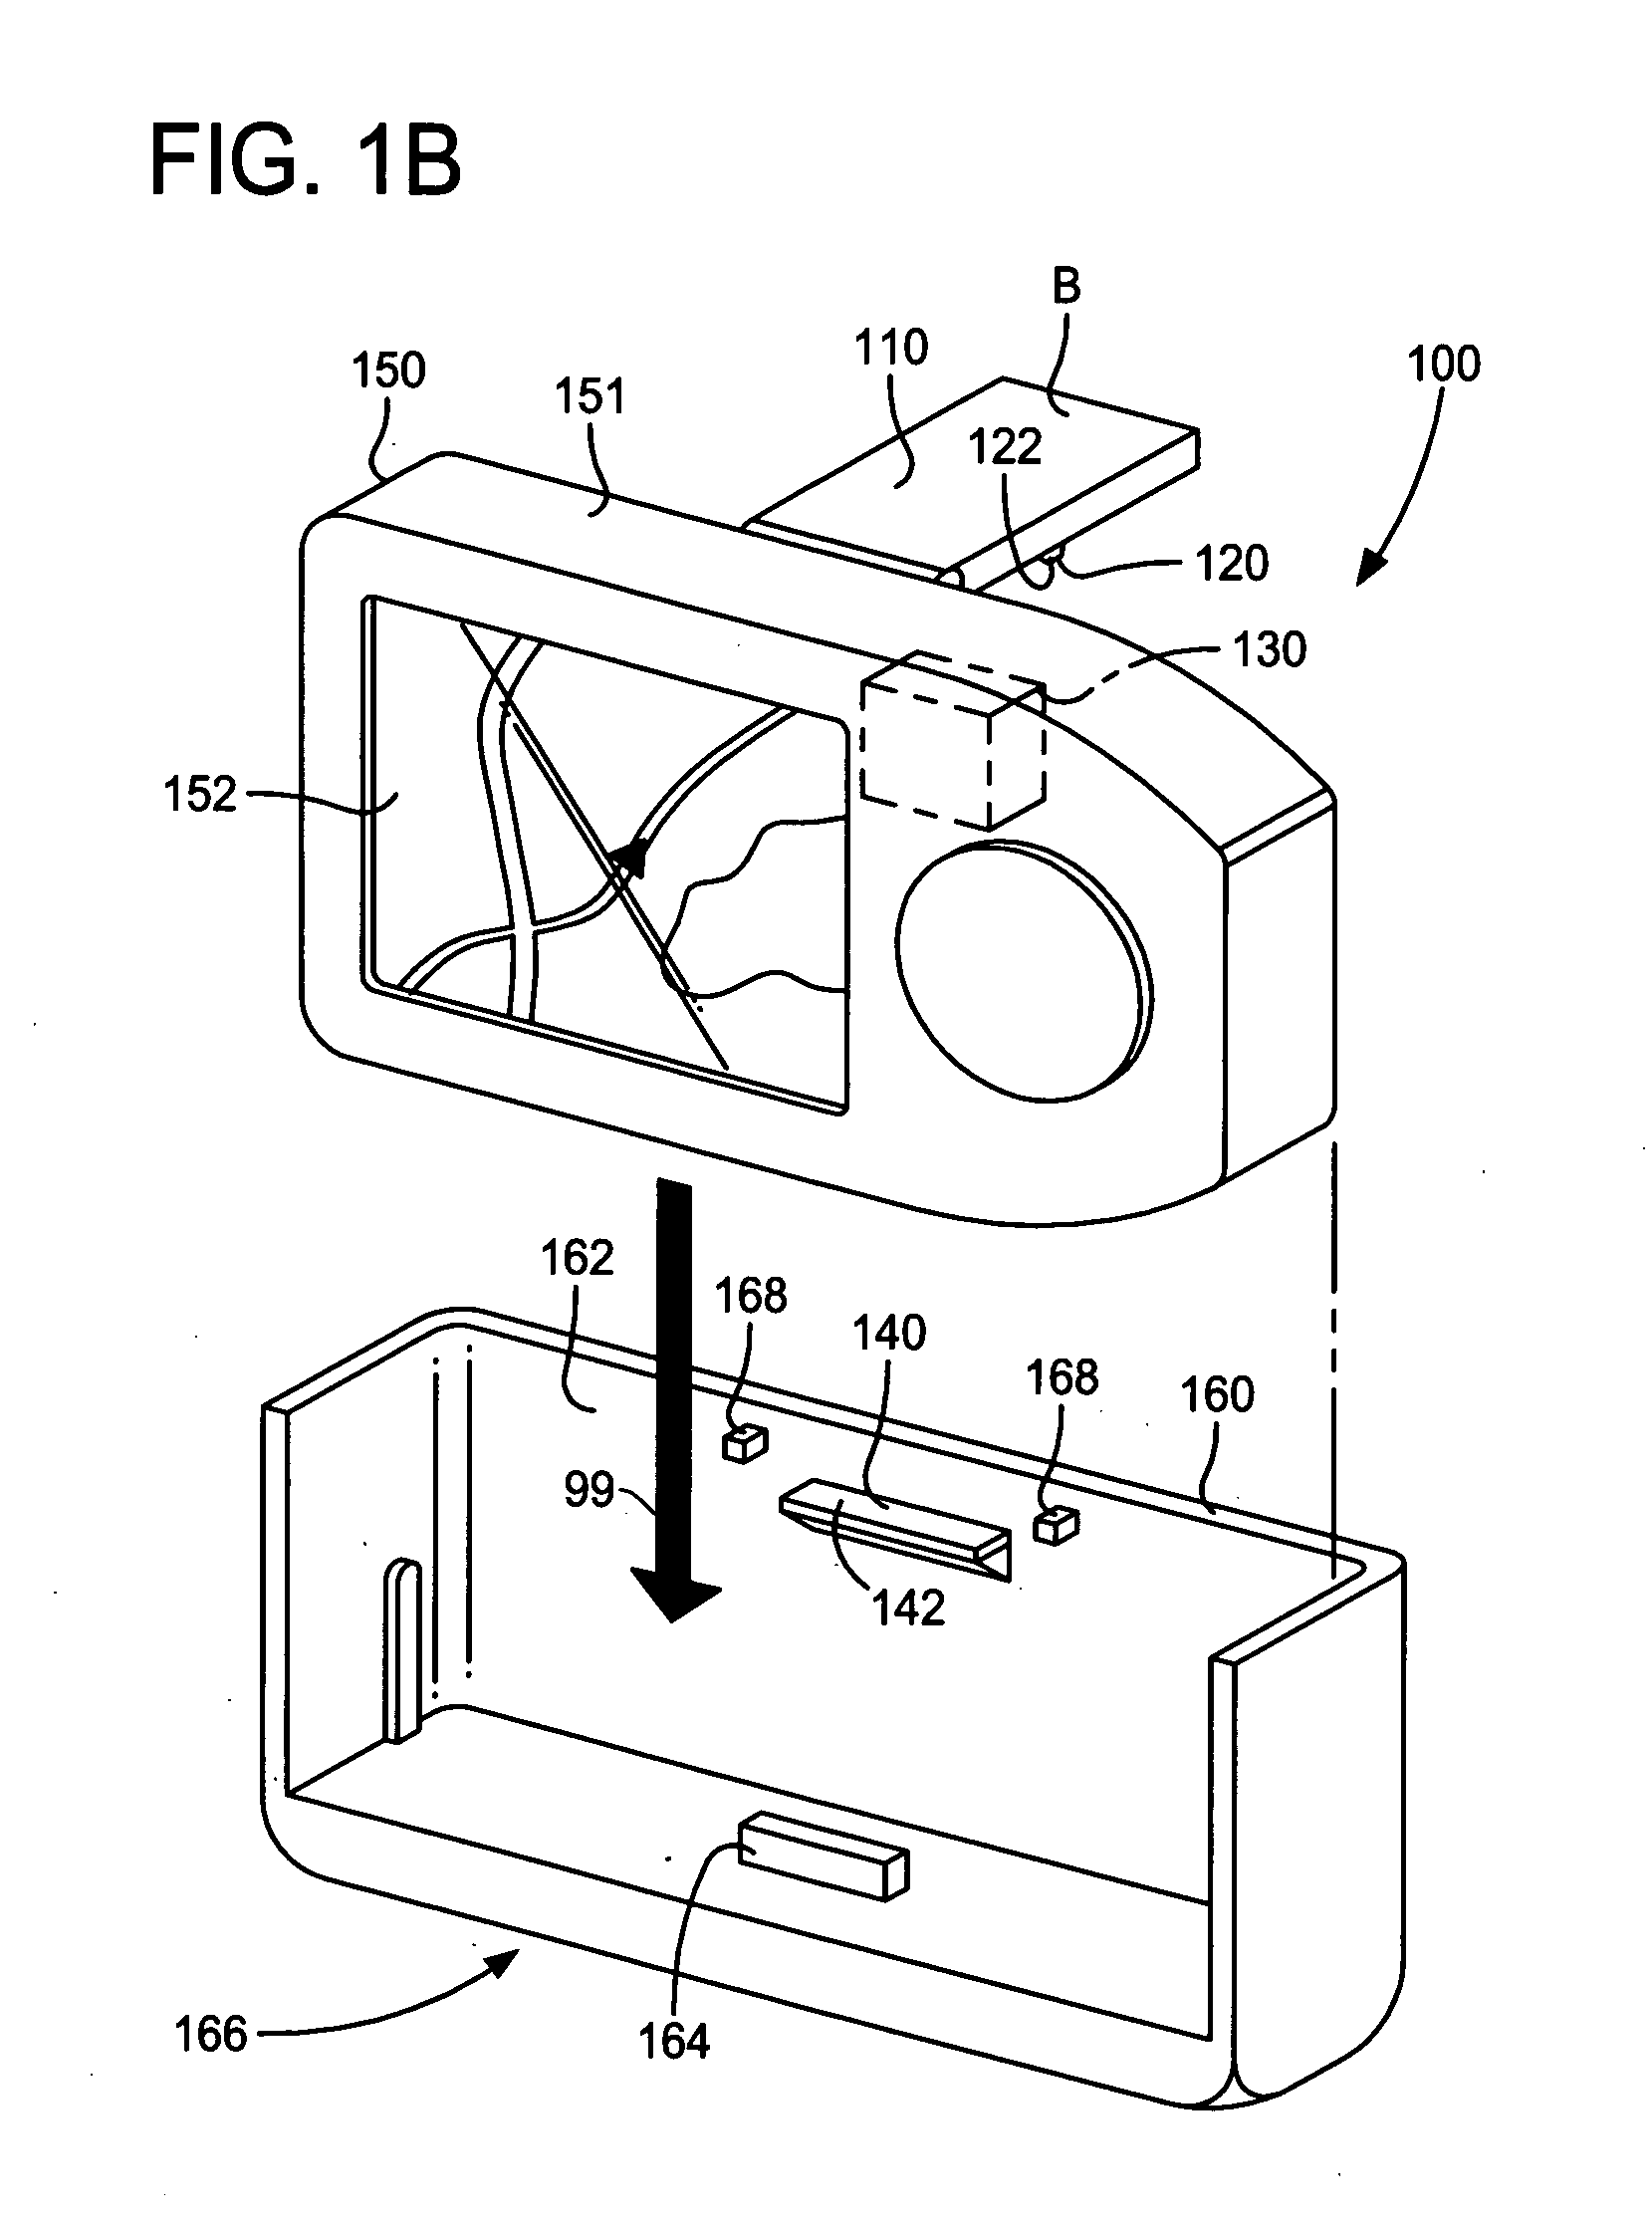 Display control and antenna positioning apparatus for display device